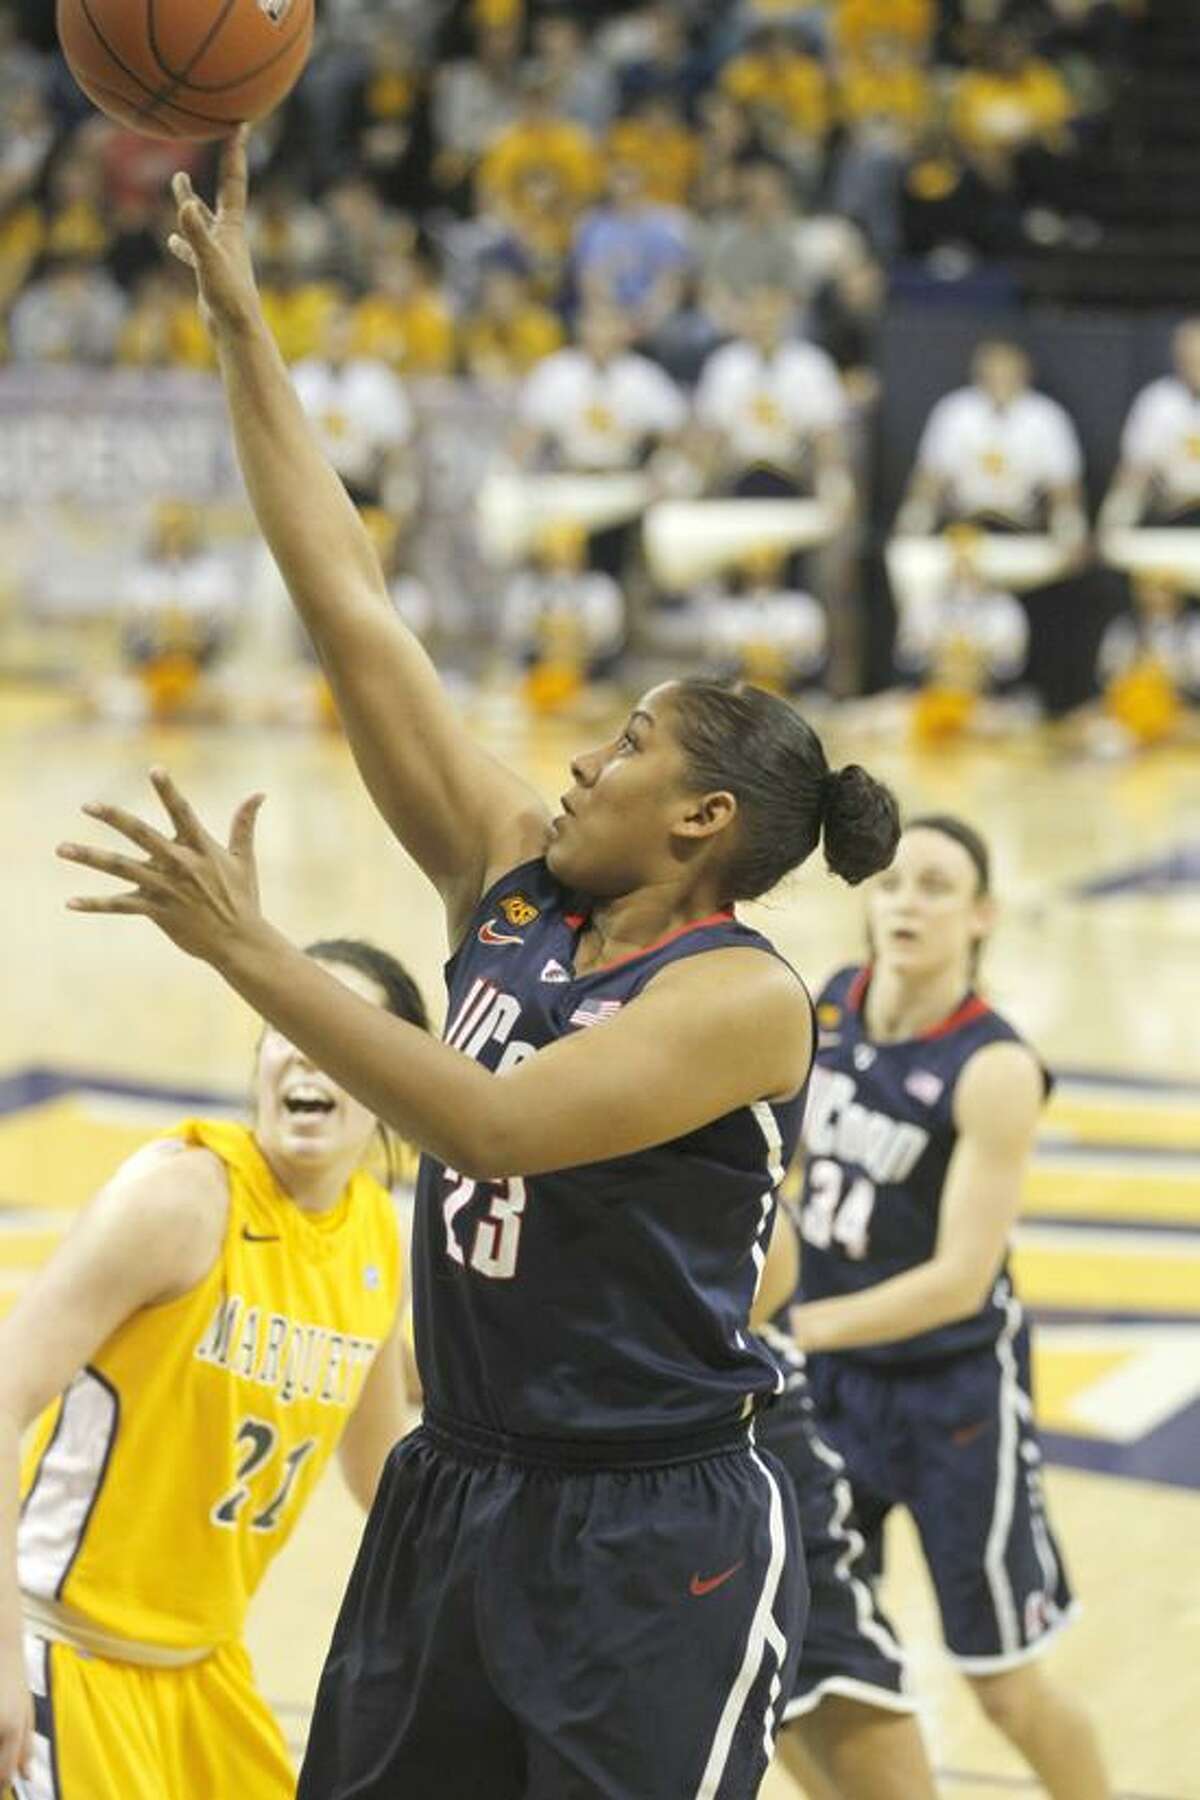 Connecticut's Kaleena Mosqueda-Lewis(23) puts up a shot against Marquette in the first half of an NCAA college basketball game Saturday, Feb. 25, 2012, in Milwaukee. (AP Photo/Jeffrey Phelps)